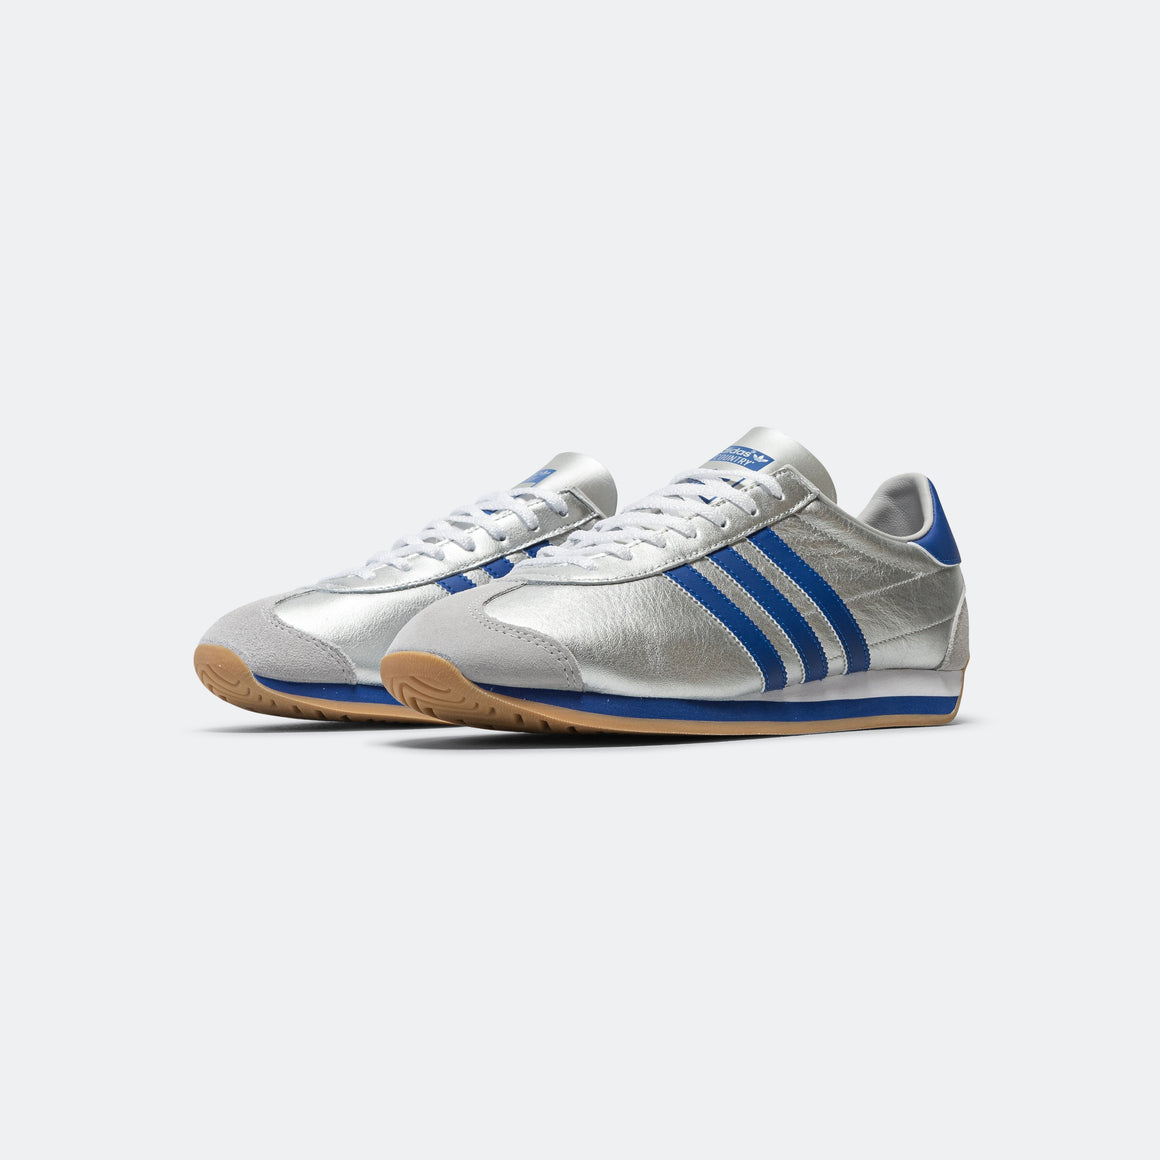 adidas - Country OG - Metallic Silver/Bright Blue-Footwear White - UP THERE